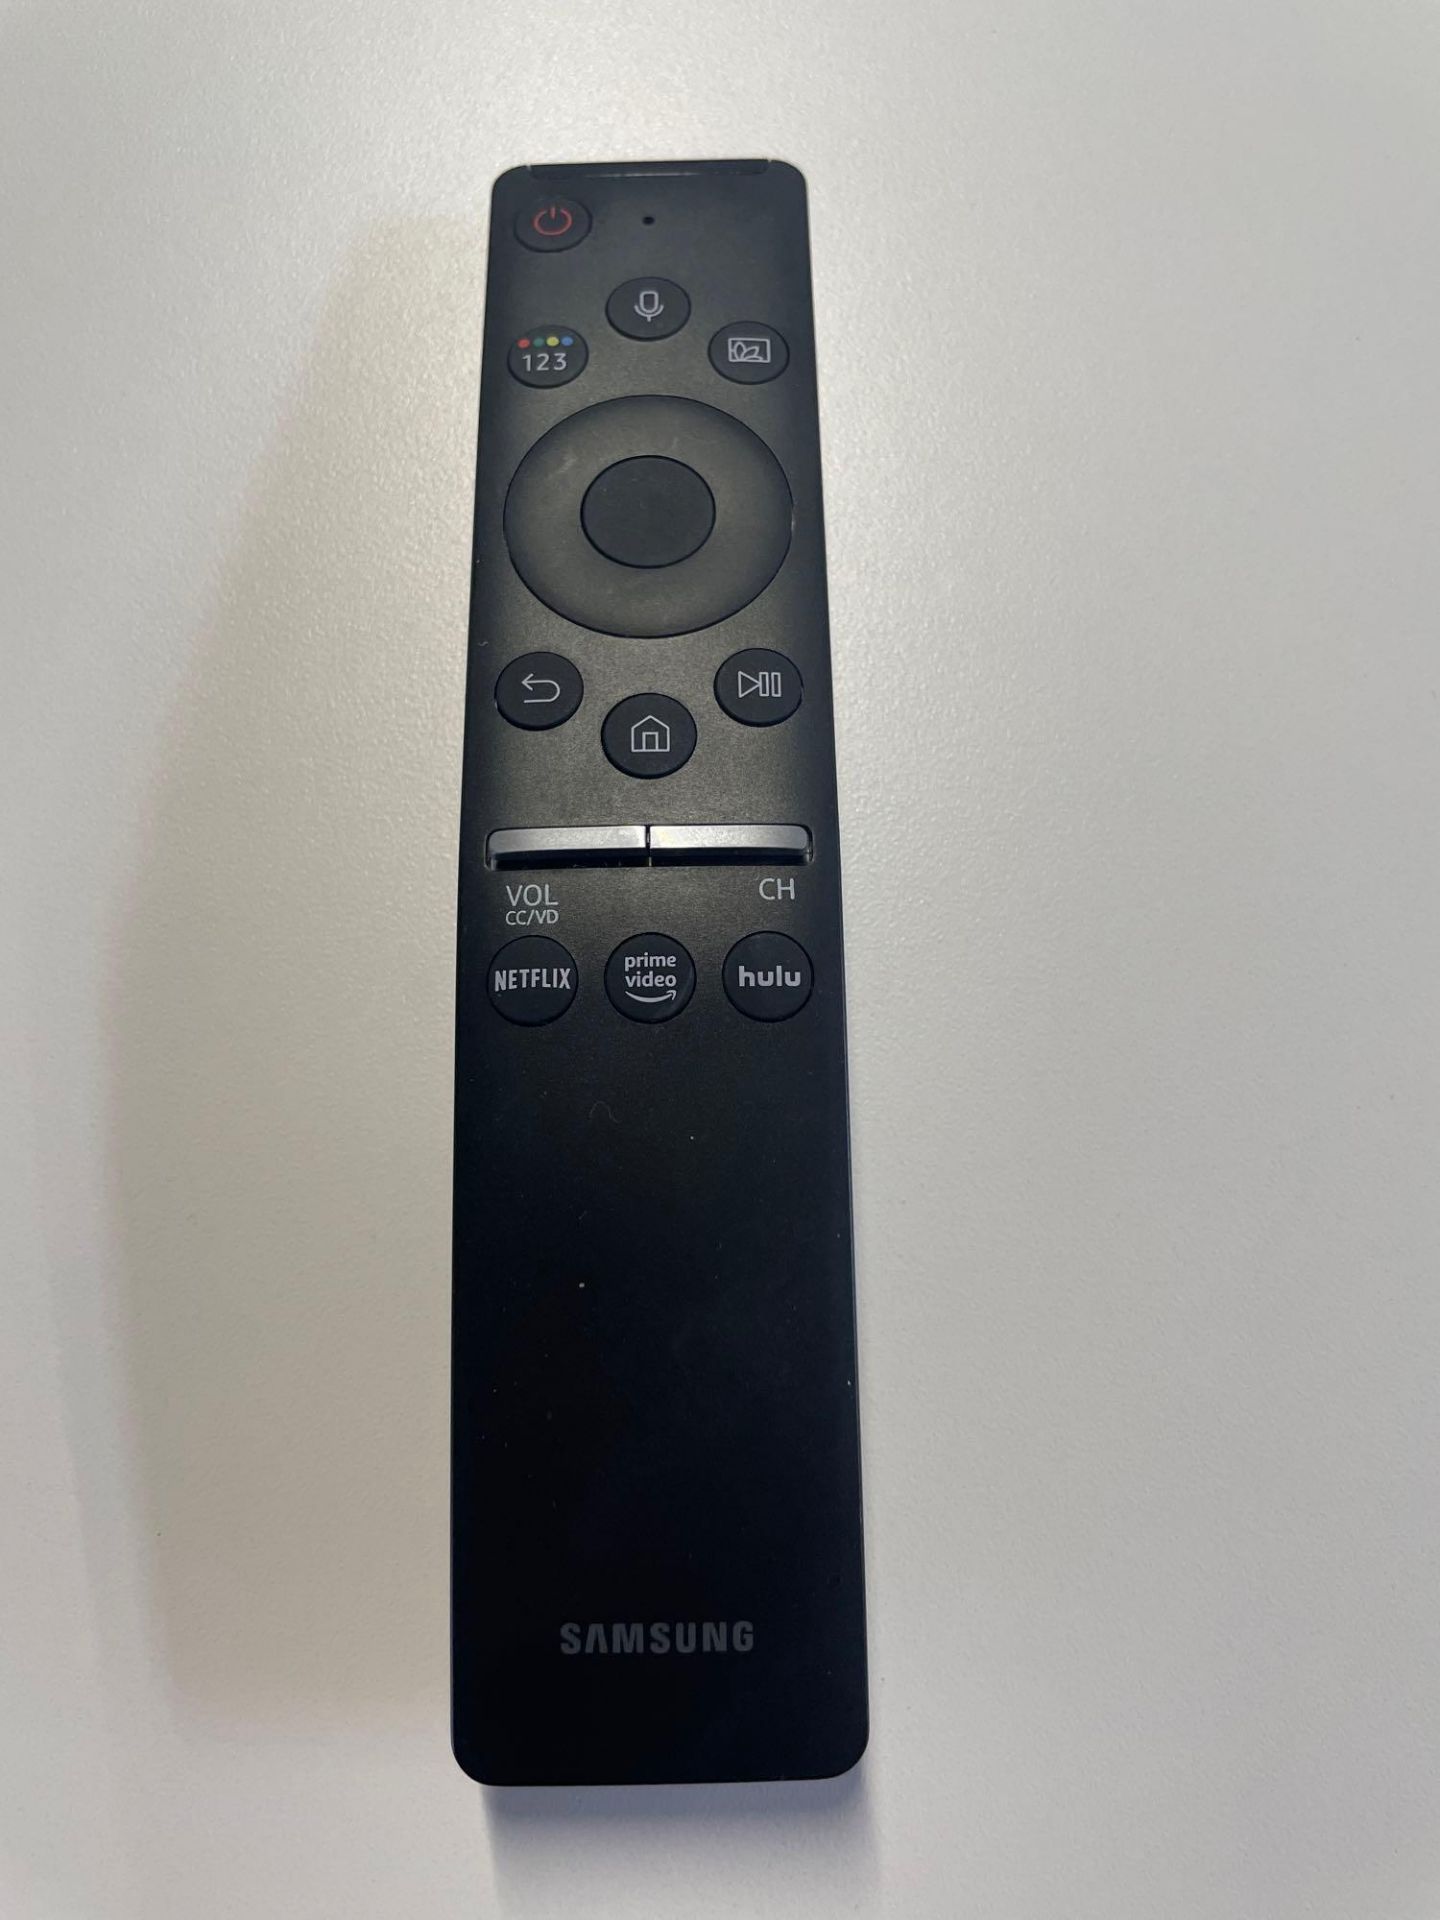 Samsung TV with Mount/Remote - Image 4 of 4